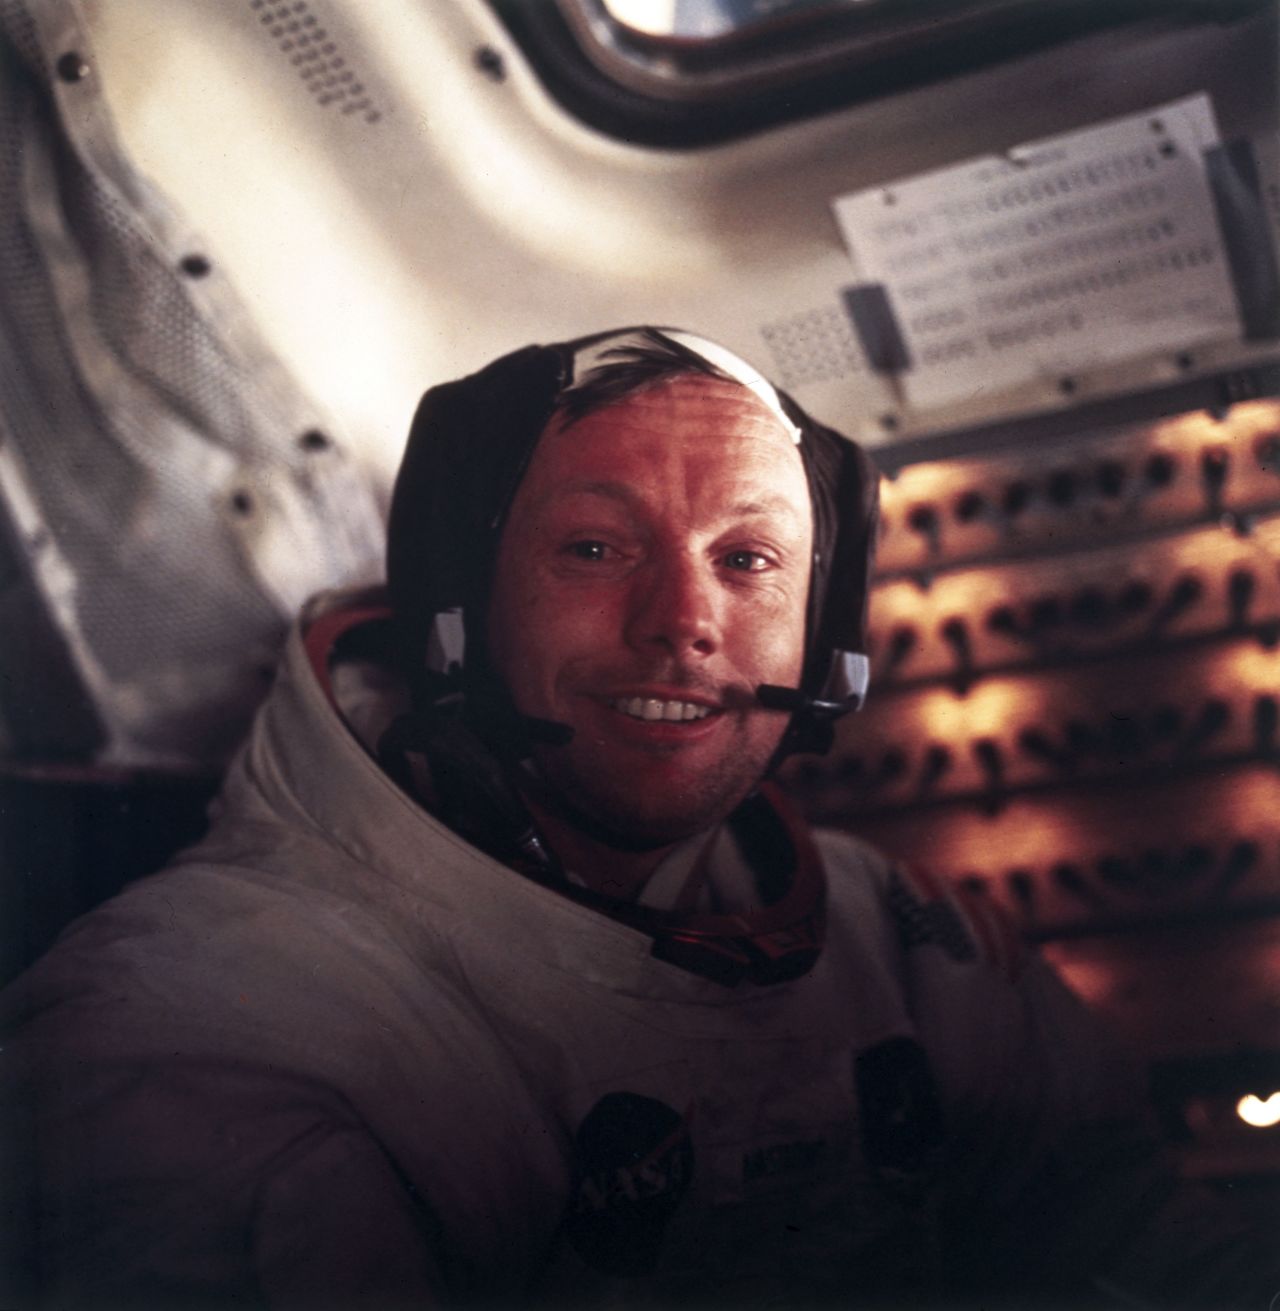 On July 20, 1969, the Apollo 11 mission put the first humans on the moon. Neil Armstrong famously commemorated his first steps on the moon by saying, "That's one small step for man, one giant leap for mankind."